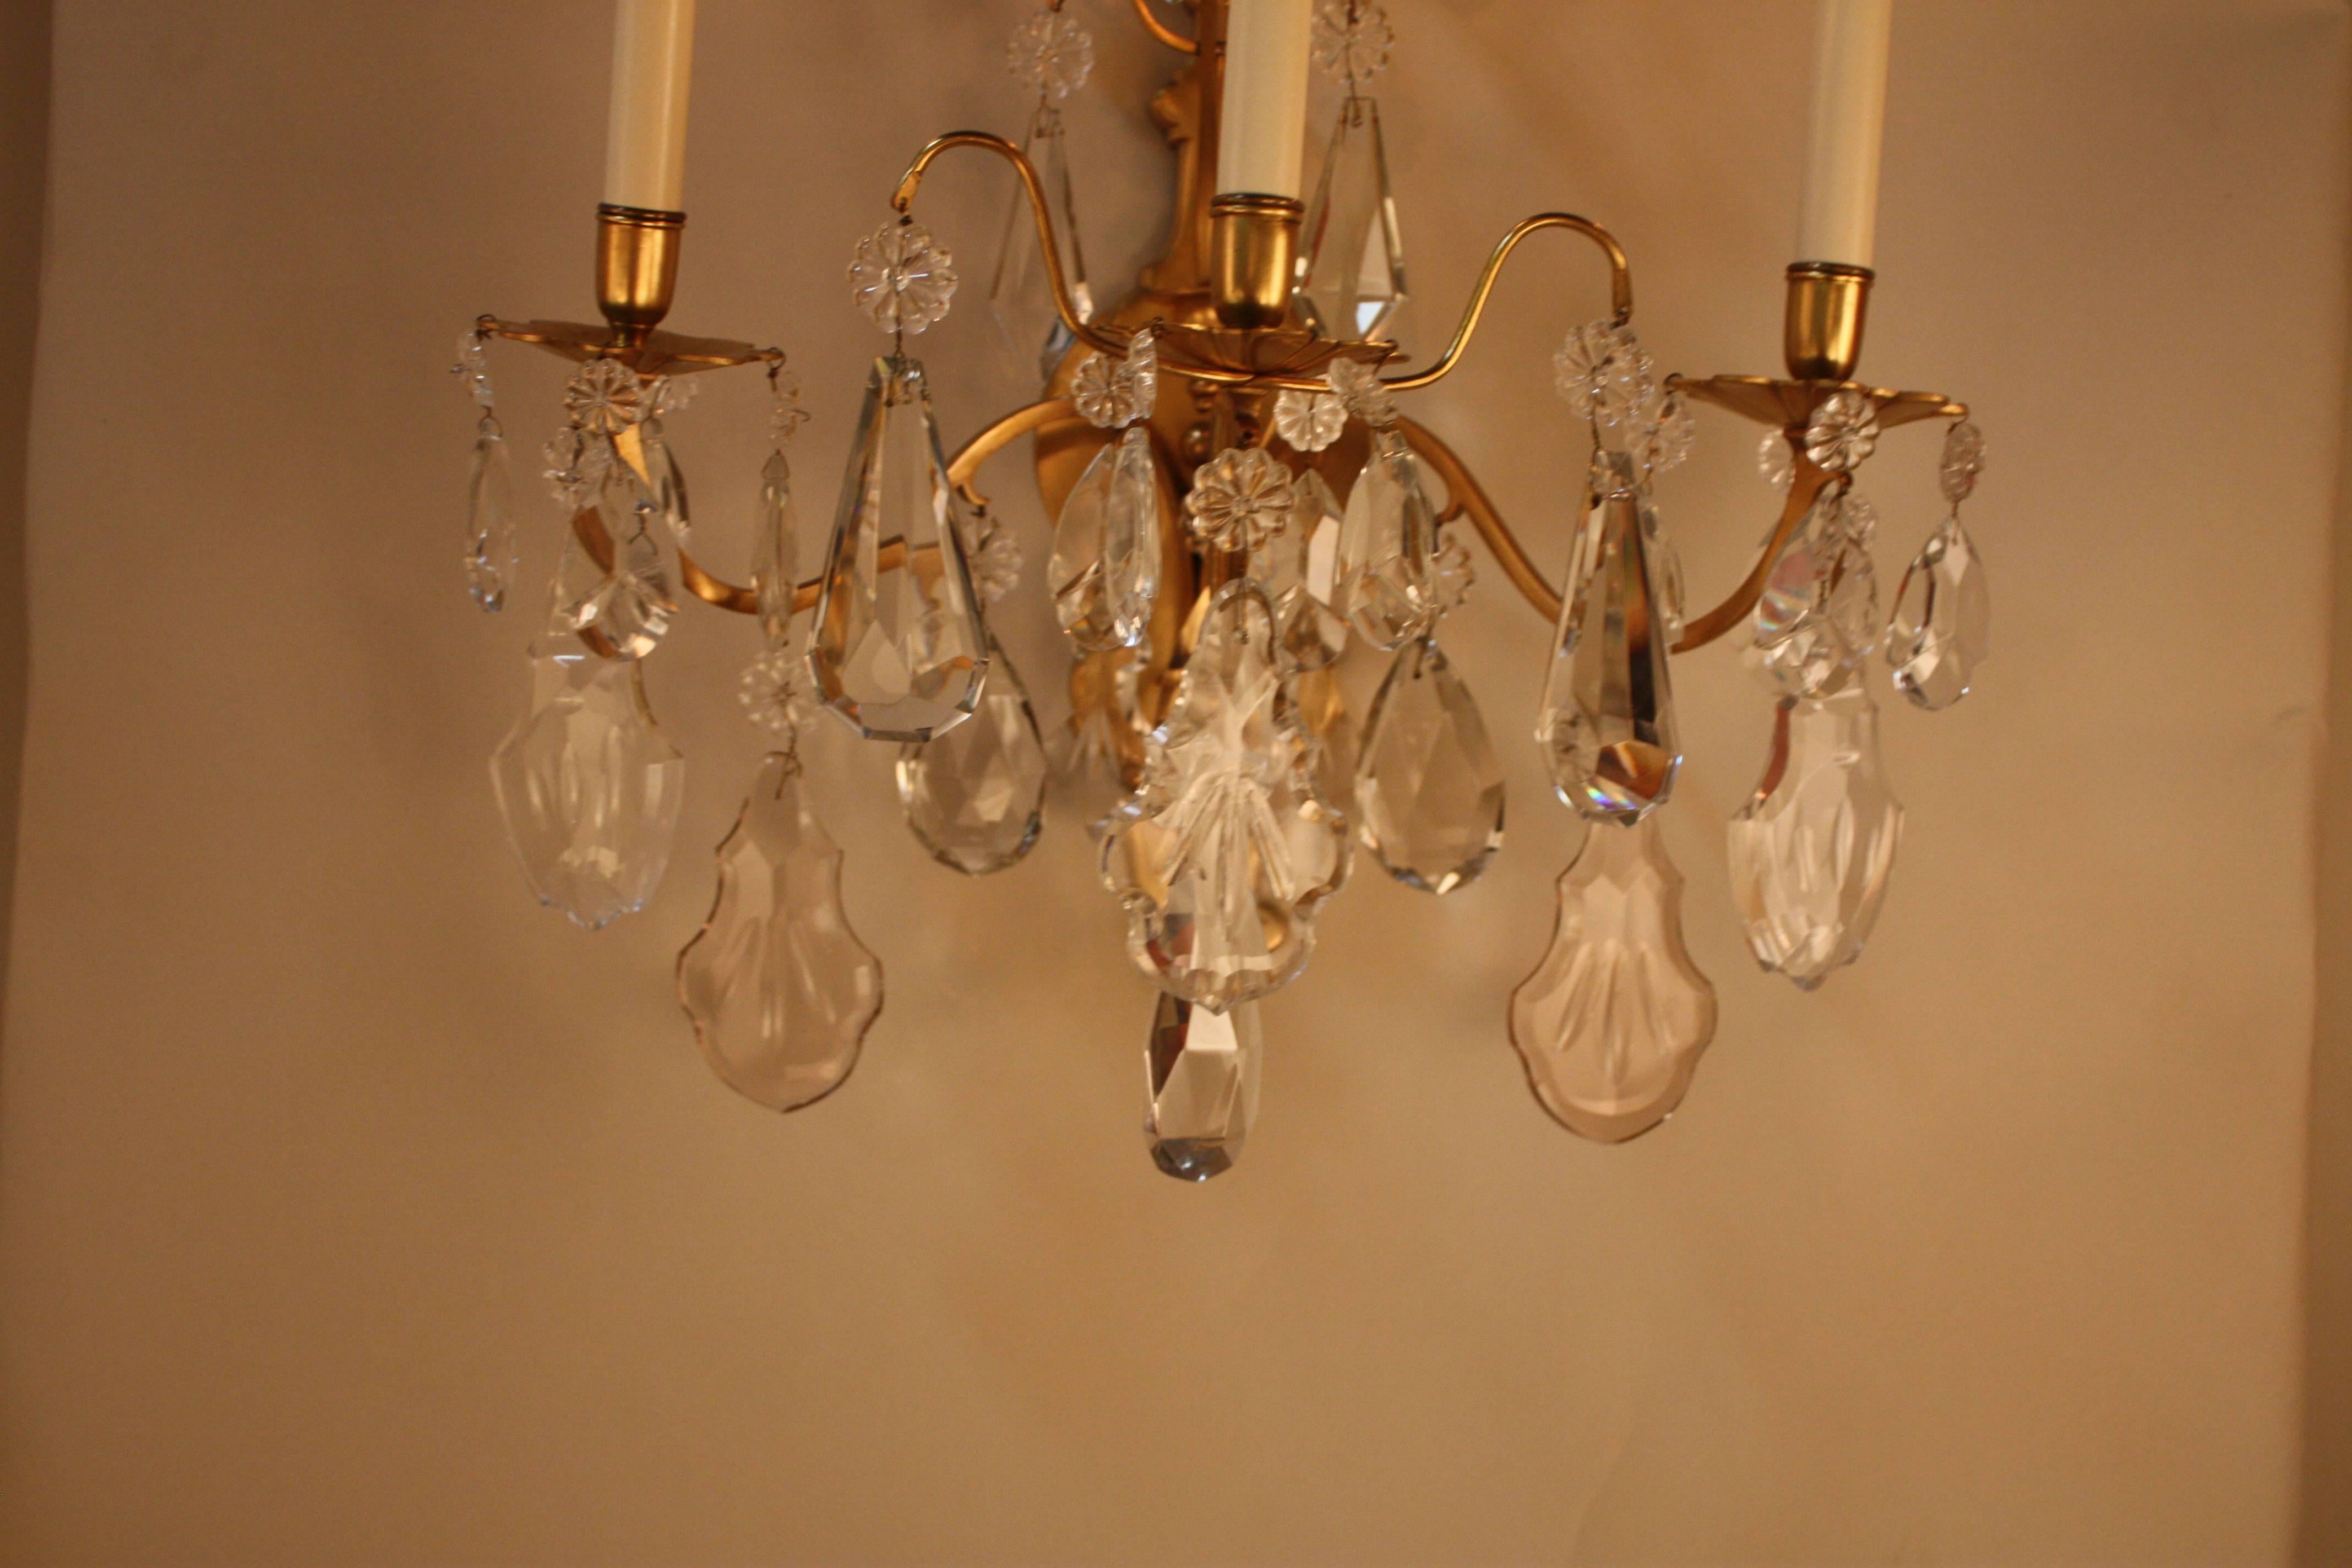 Pair of 1930s three-light bronze and polished crystal wall sconces.
Measurement: 11.5